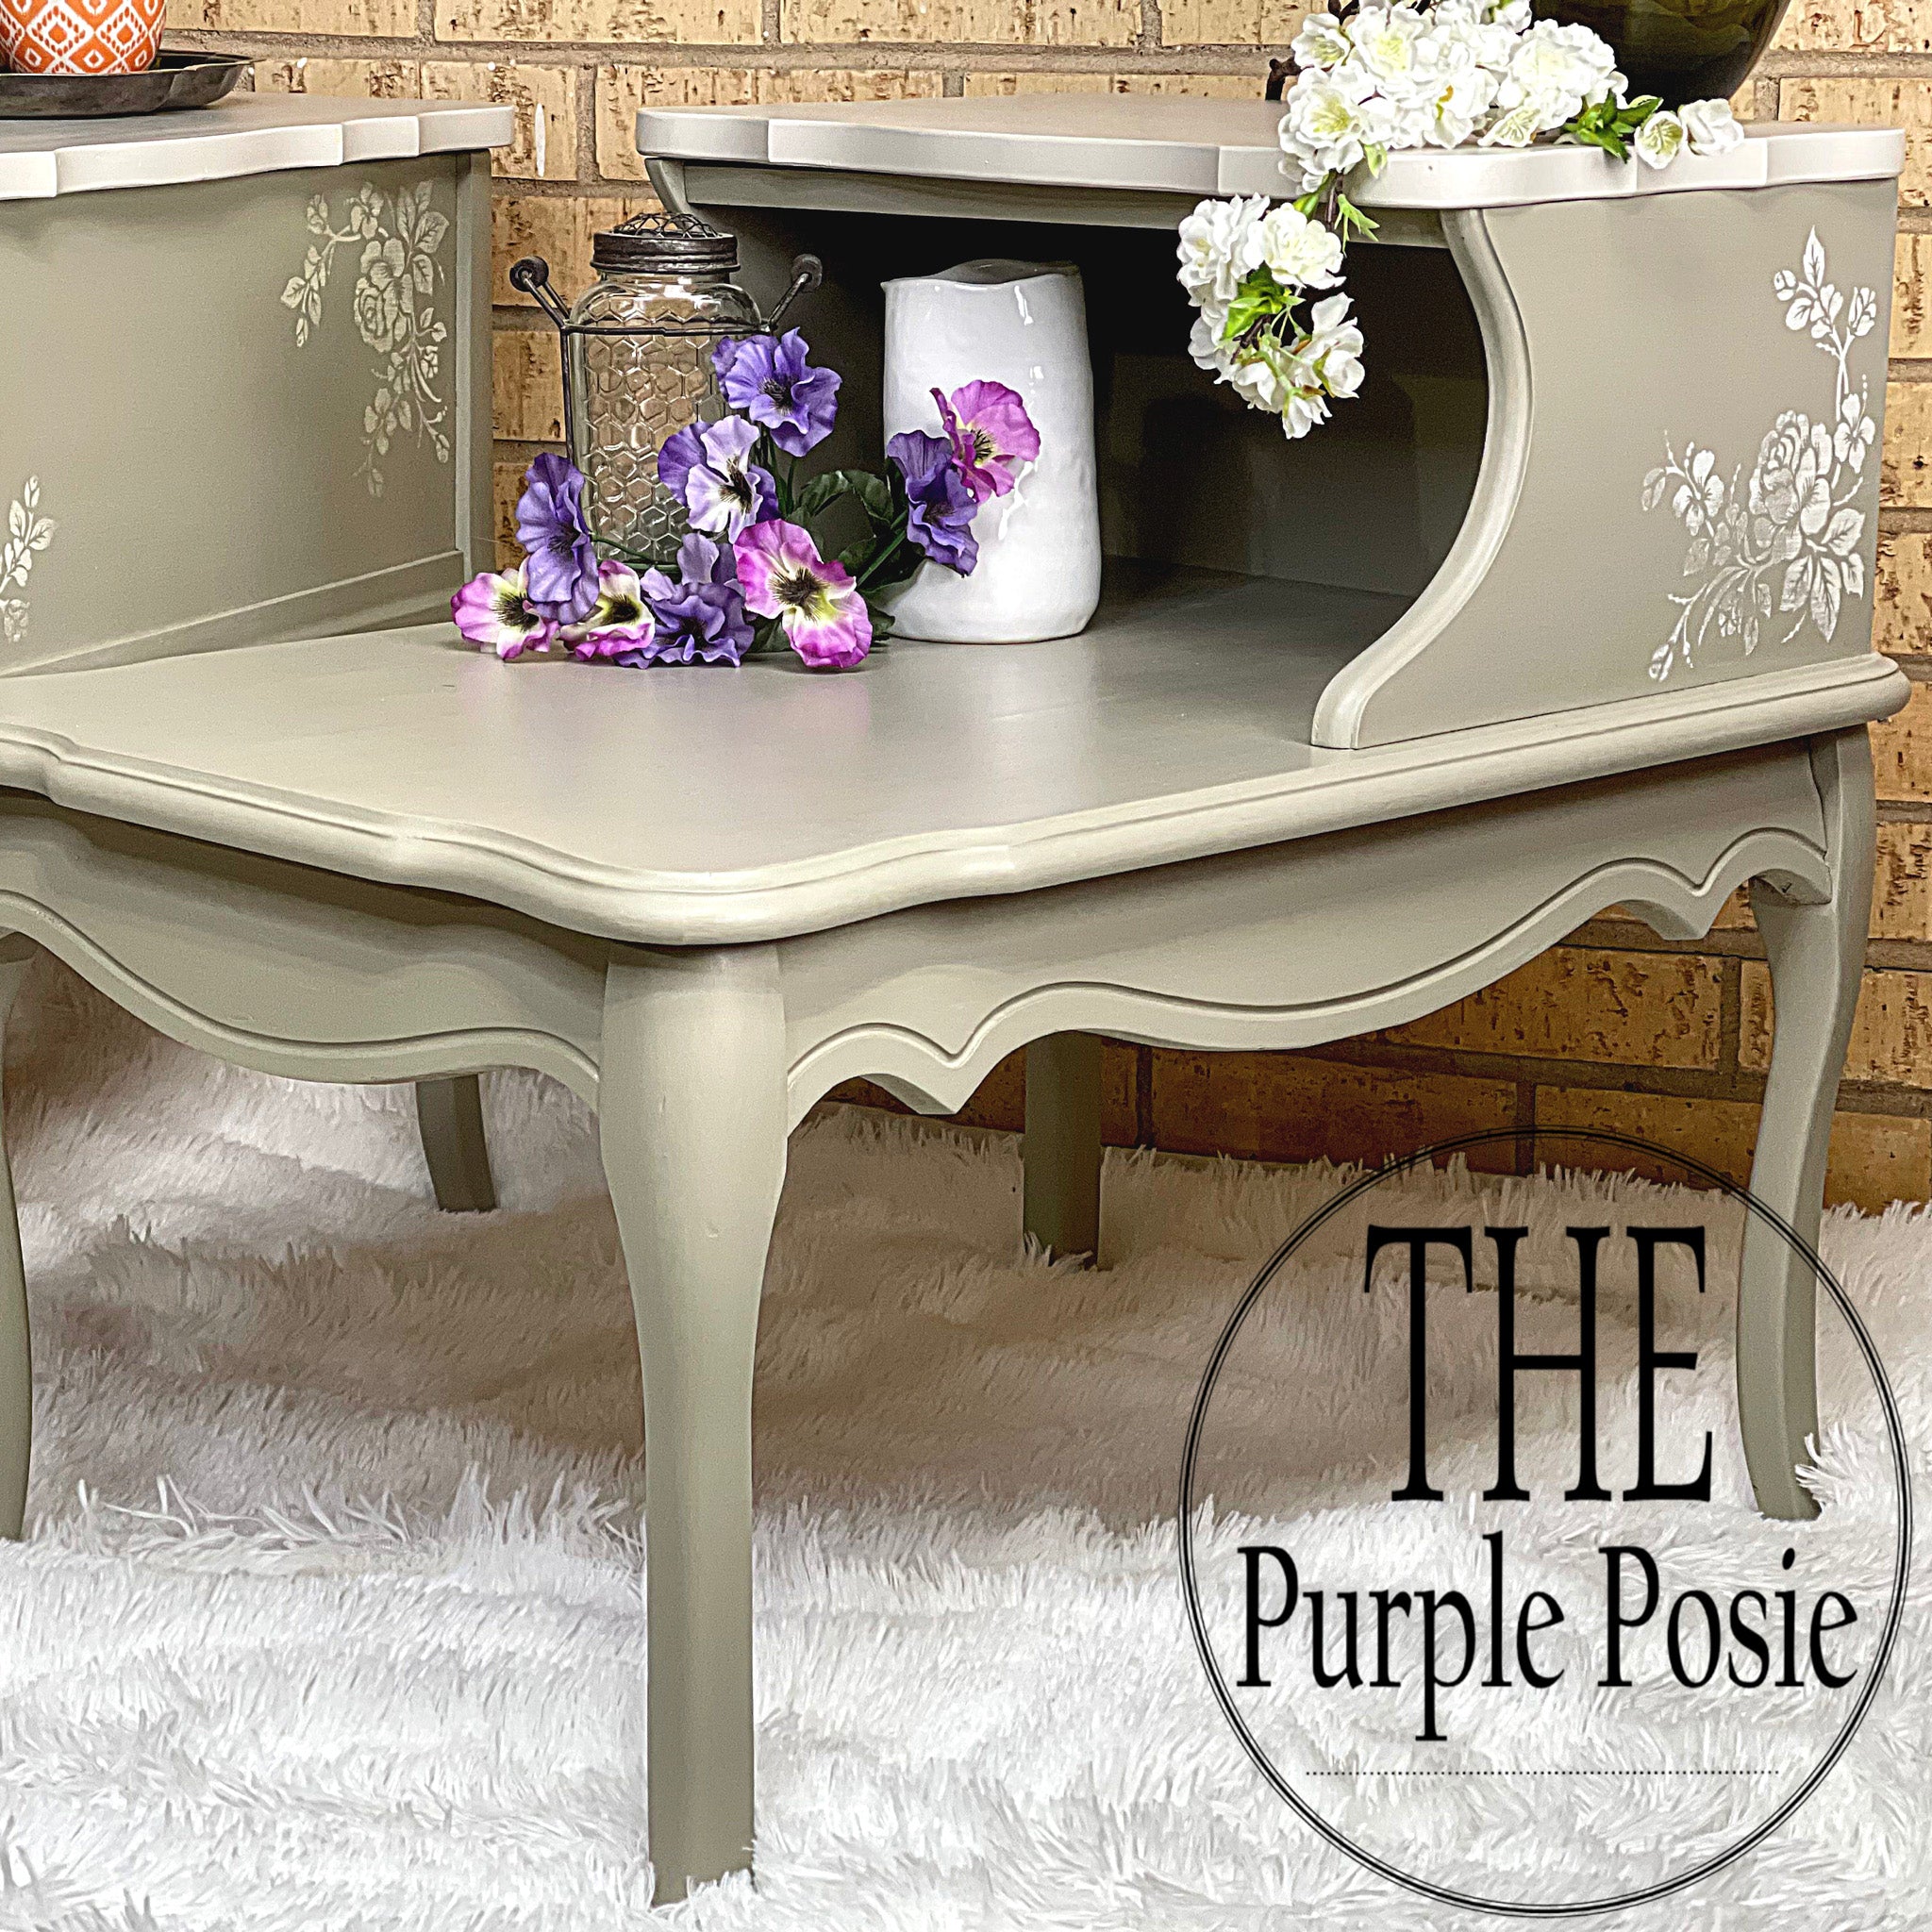 A vintage end table refurbished by The Purple Posie is painted in Dixie Belle's Sawmill Gravy chalk mineral paint.